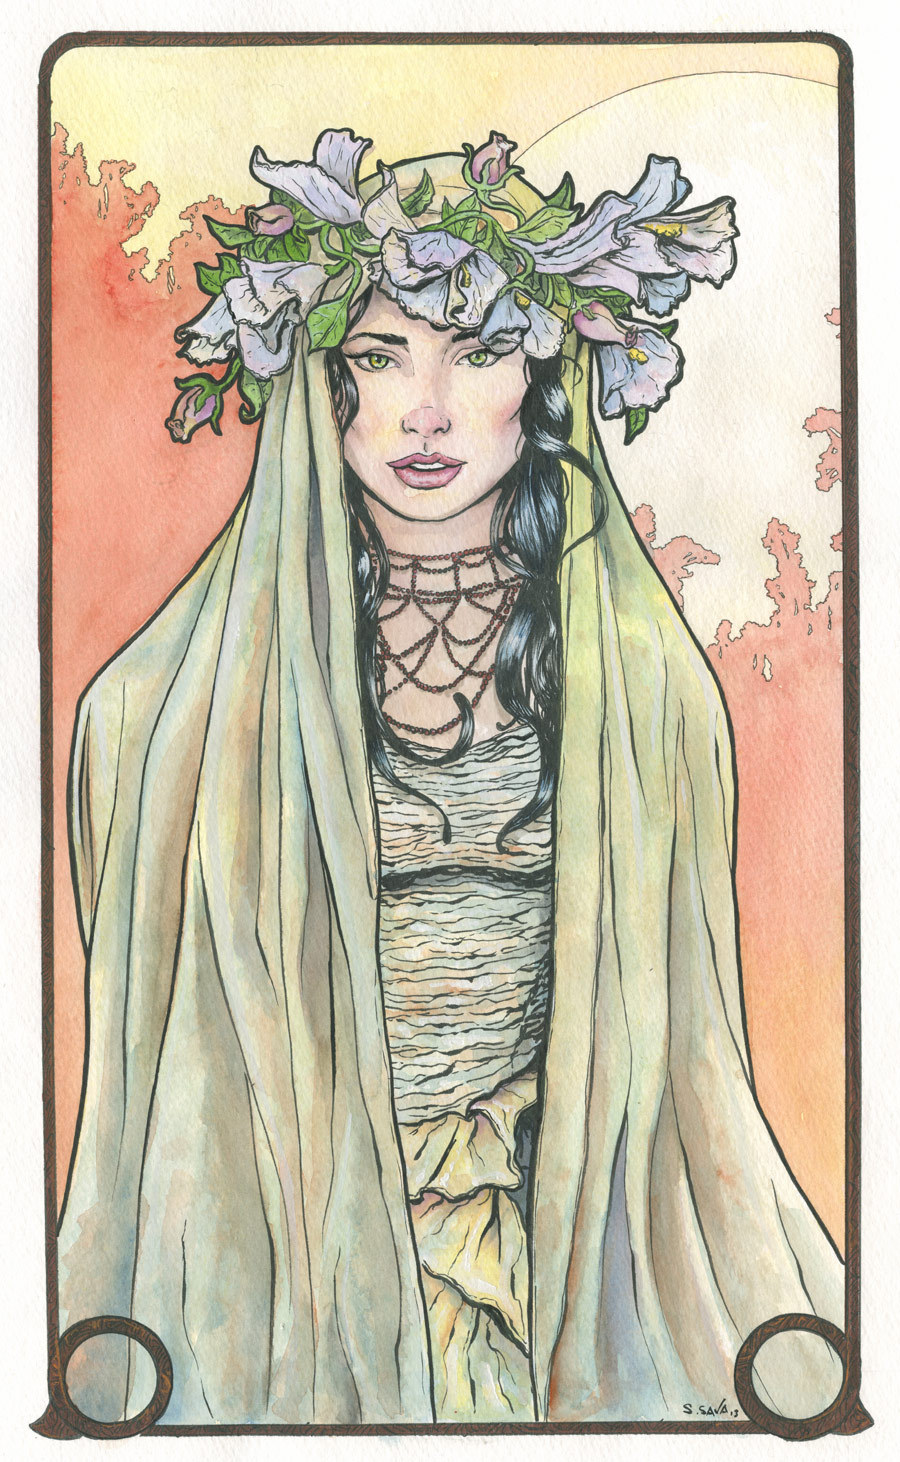 This is the 15th Art Nouveau/Alphonse Mucha inspired watercolor painting in a series I’m producing.The painting is on 12x18 inch Strathmore Cold Press watercolor paper. Done in watercolors and ink.Photo reference/inspiration from here…http://emilysoto.deviantart.com/art/Emily-Soto-OC-Workshop-360209698?q=gallery%3Aemilysoto%2F29354393&amp;qo=20Original paintings can be purchased here…http://www.etsy.com/shop/ScottChristianSava?section_id=11821287and Limited Edition Prints can be purchased here…http://www.etsy.com/shop/ScottChristianSava?section_id=11821297Thanks for looking!Scott